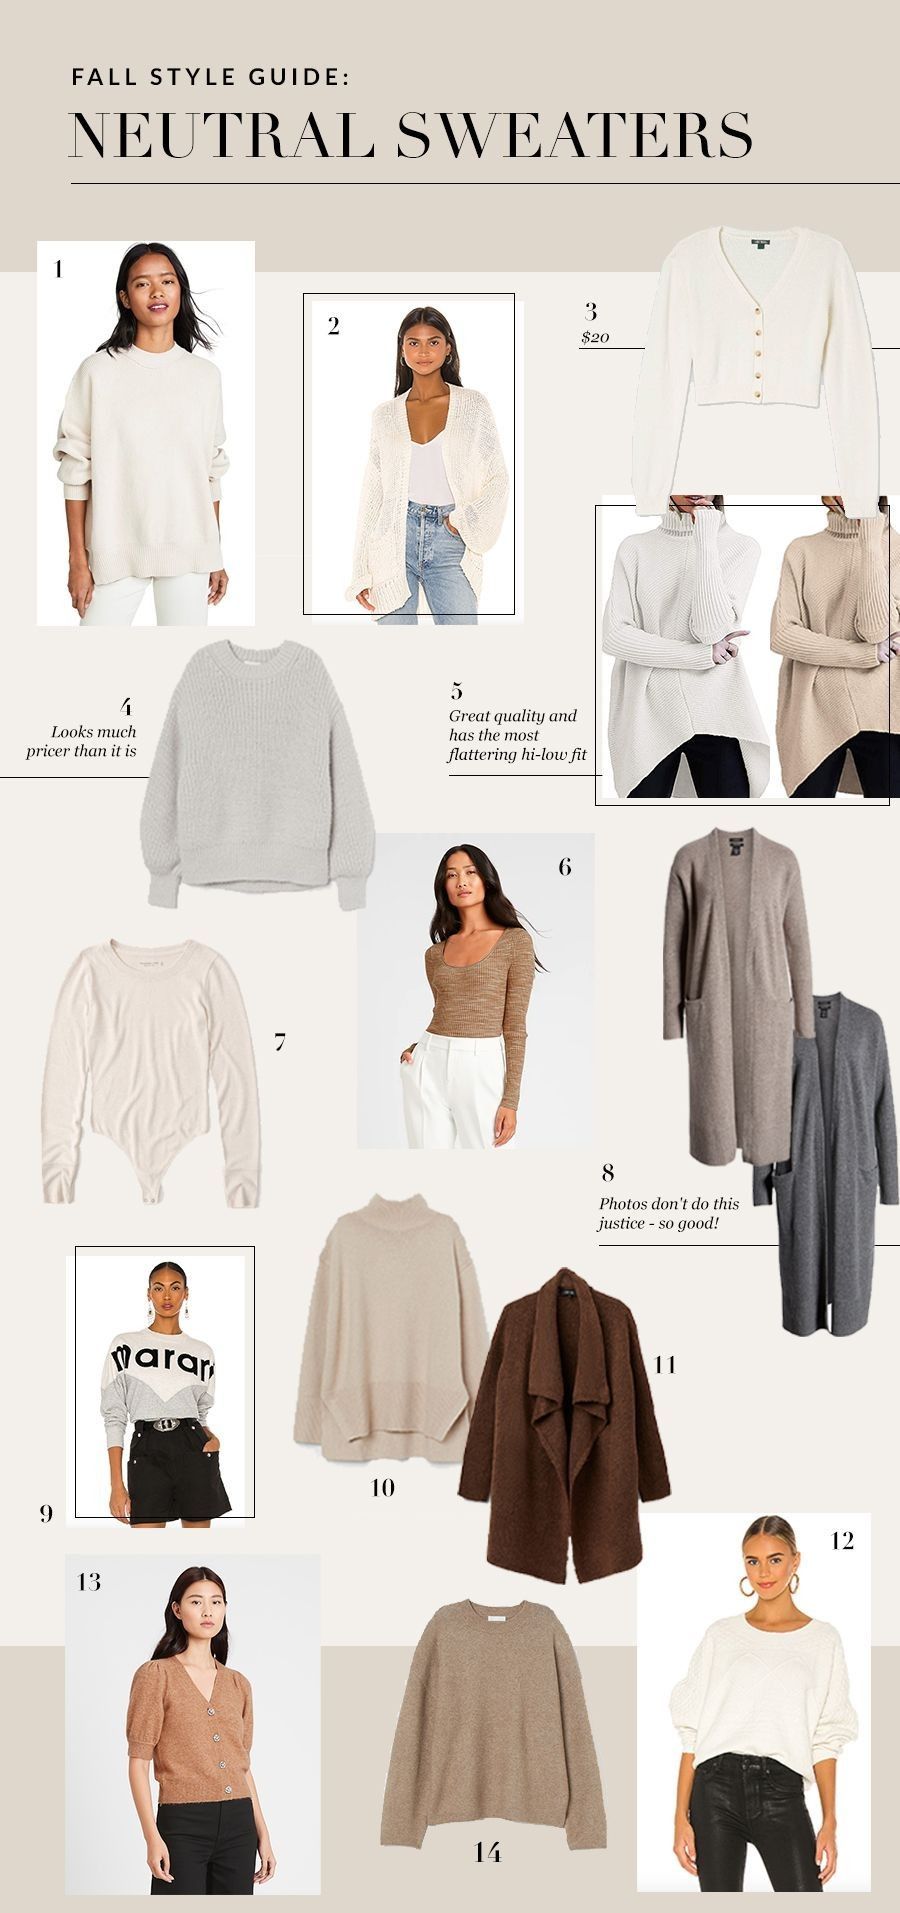 Neutral Sweaters